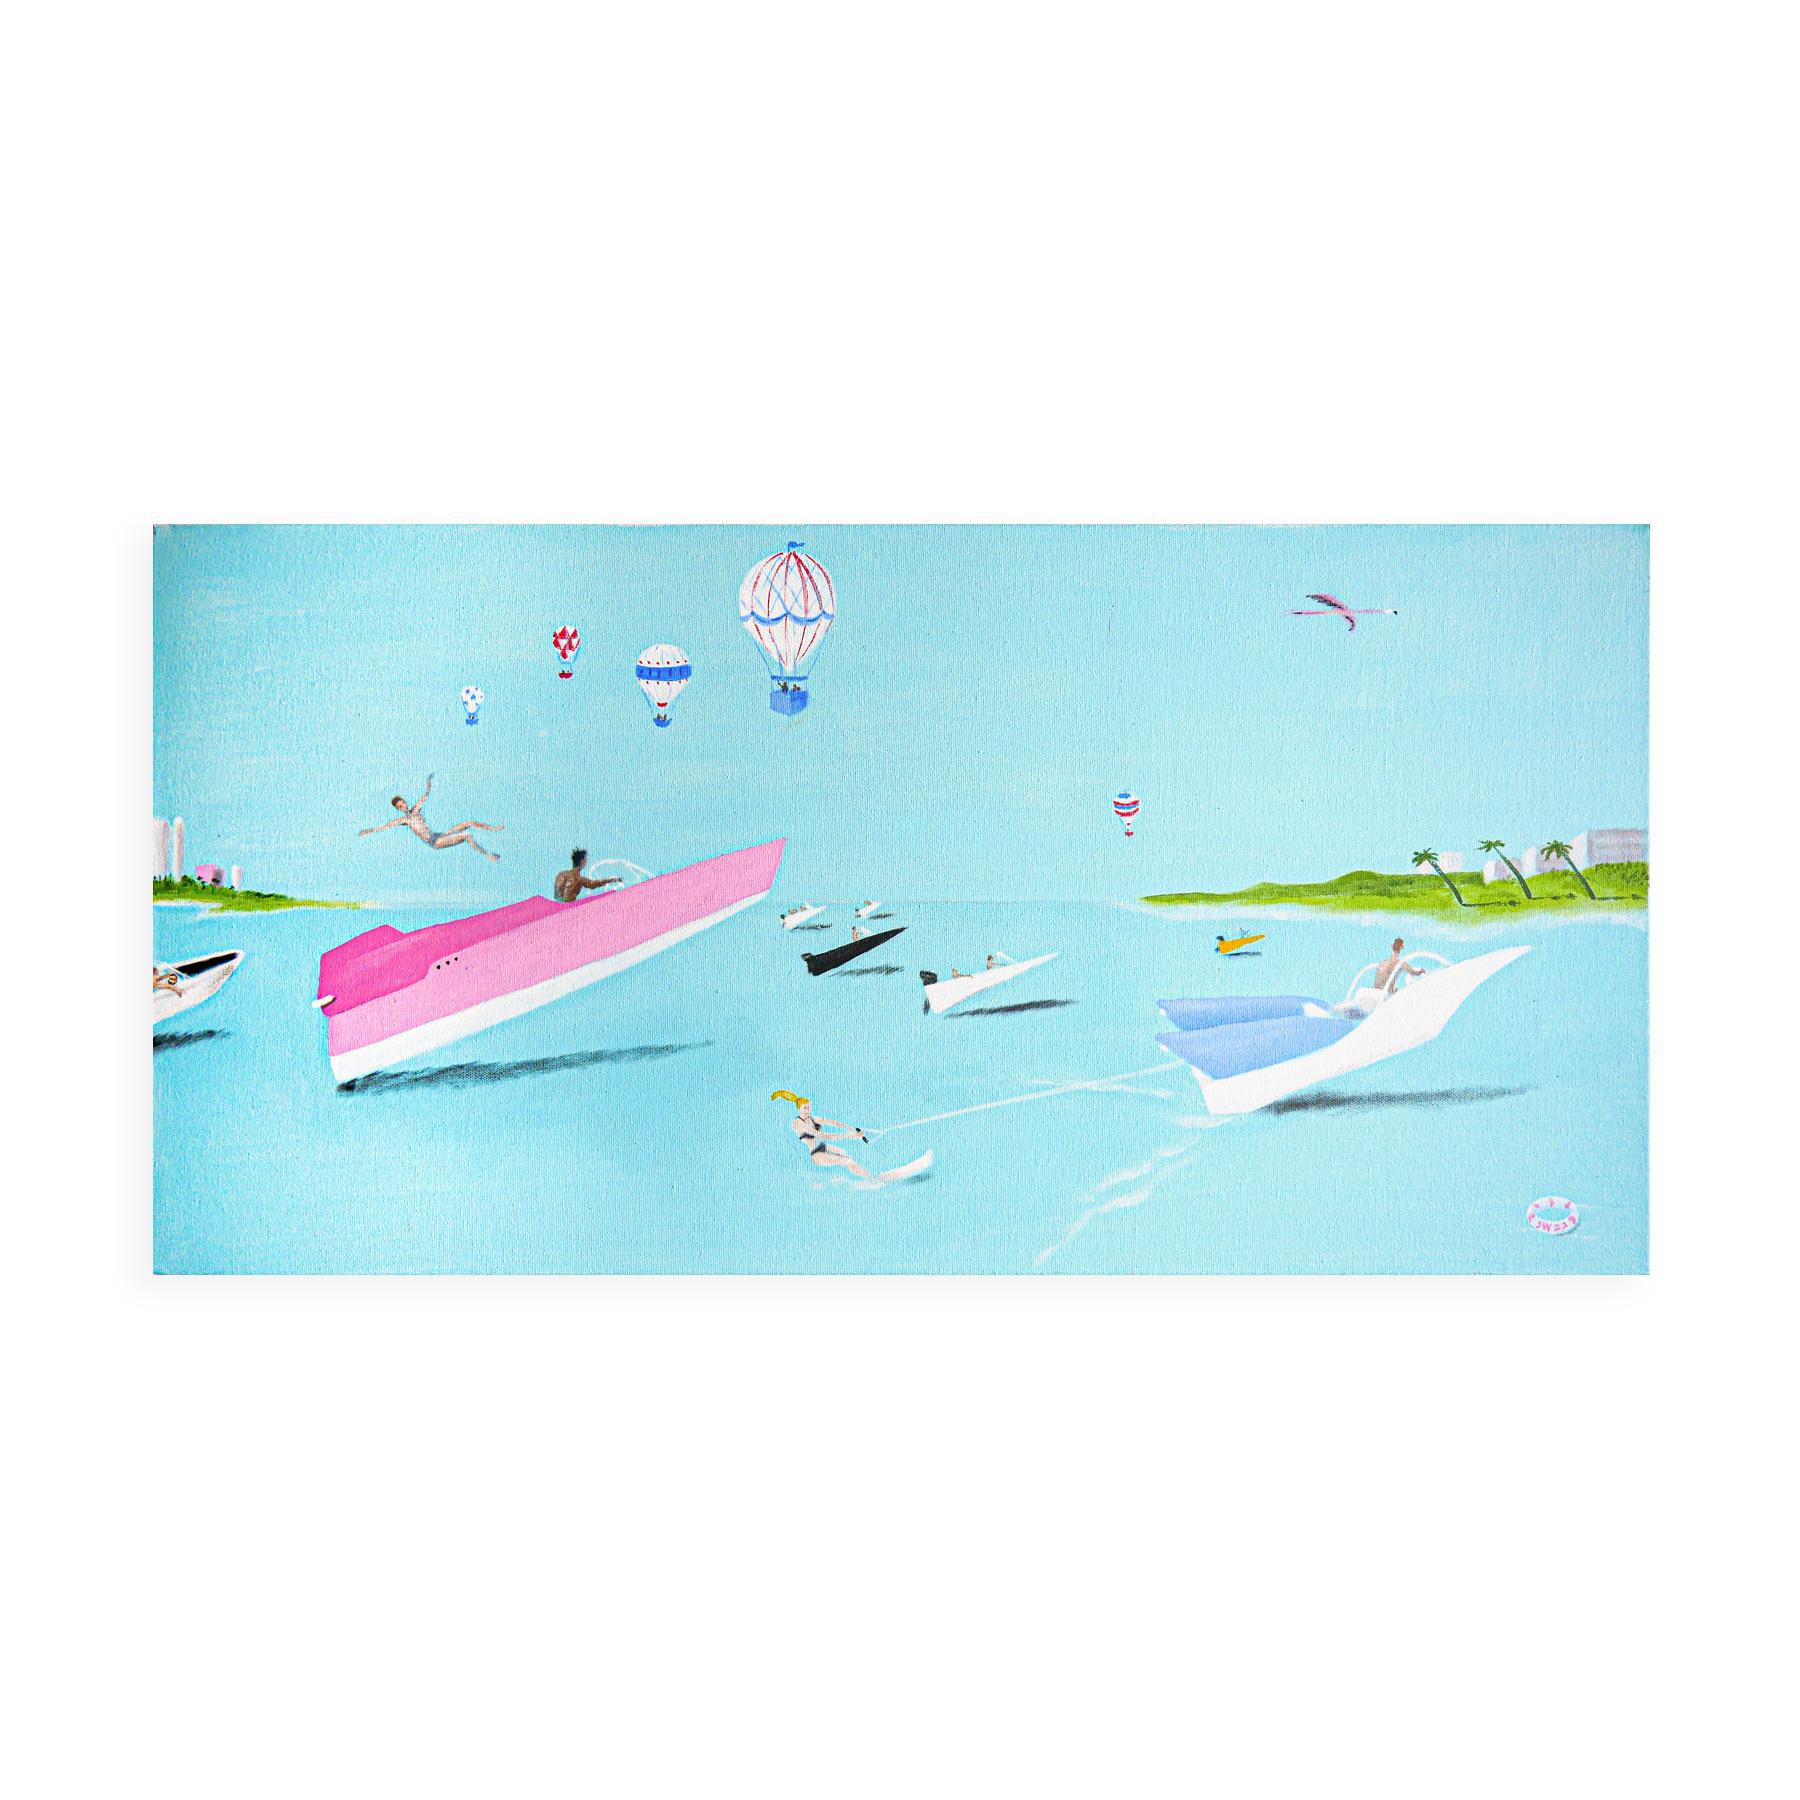 Sky blue, pink, and light green abstract contemporary painting by Houston, TX artist Scott Woodard. The painting depicts a fun beach scene with surrealistic elements such as boats and jetskis that look like origami. Signed by the artist at the